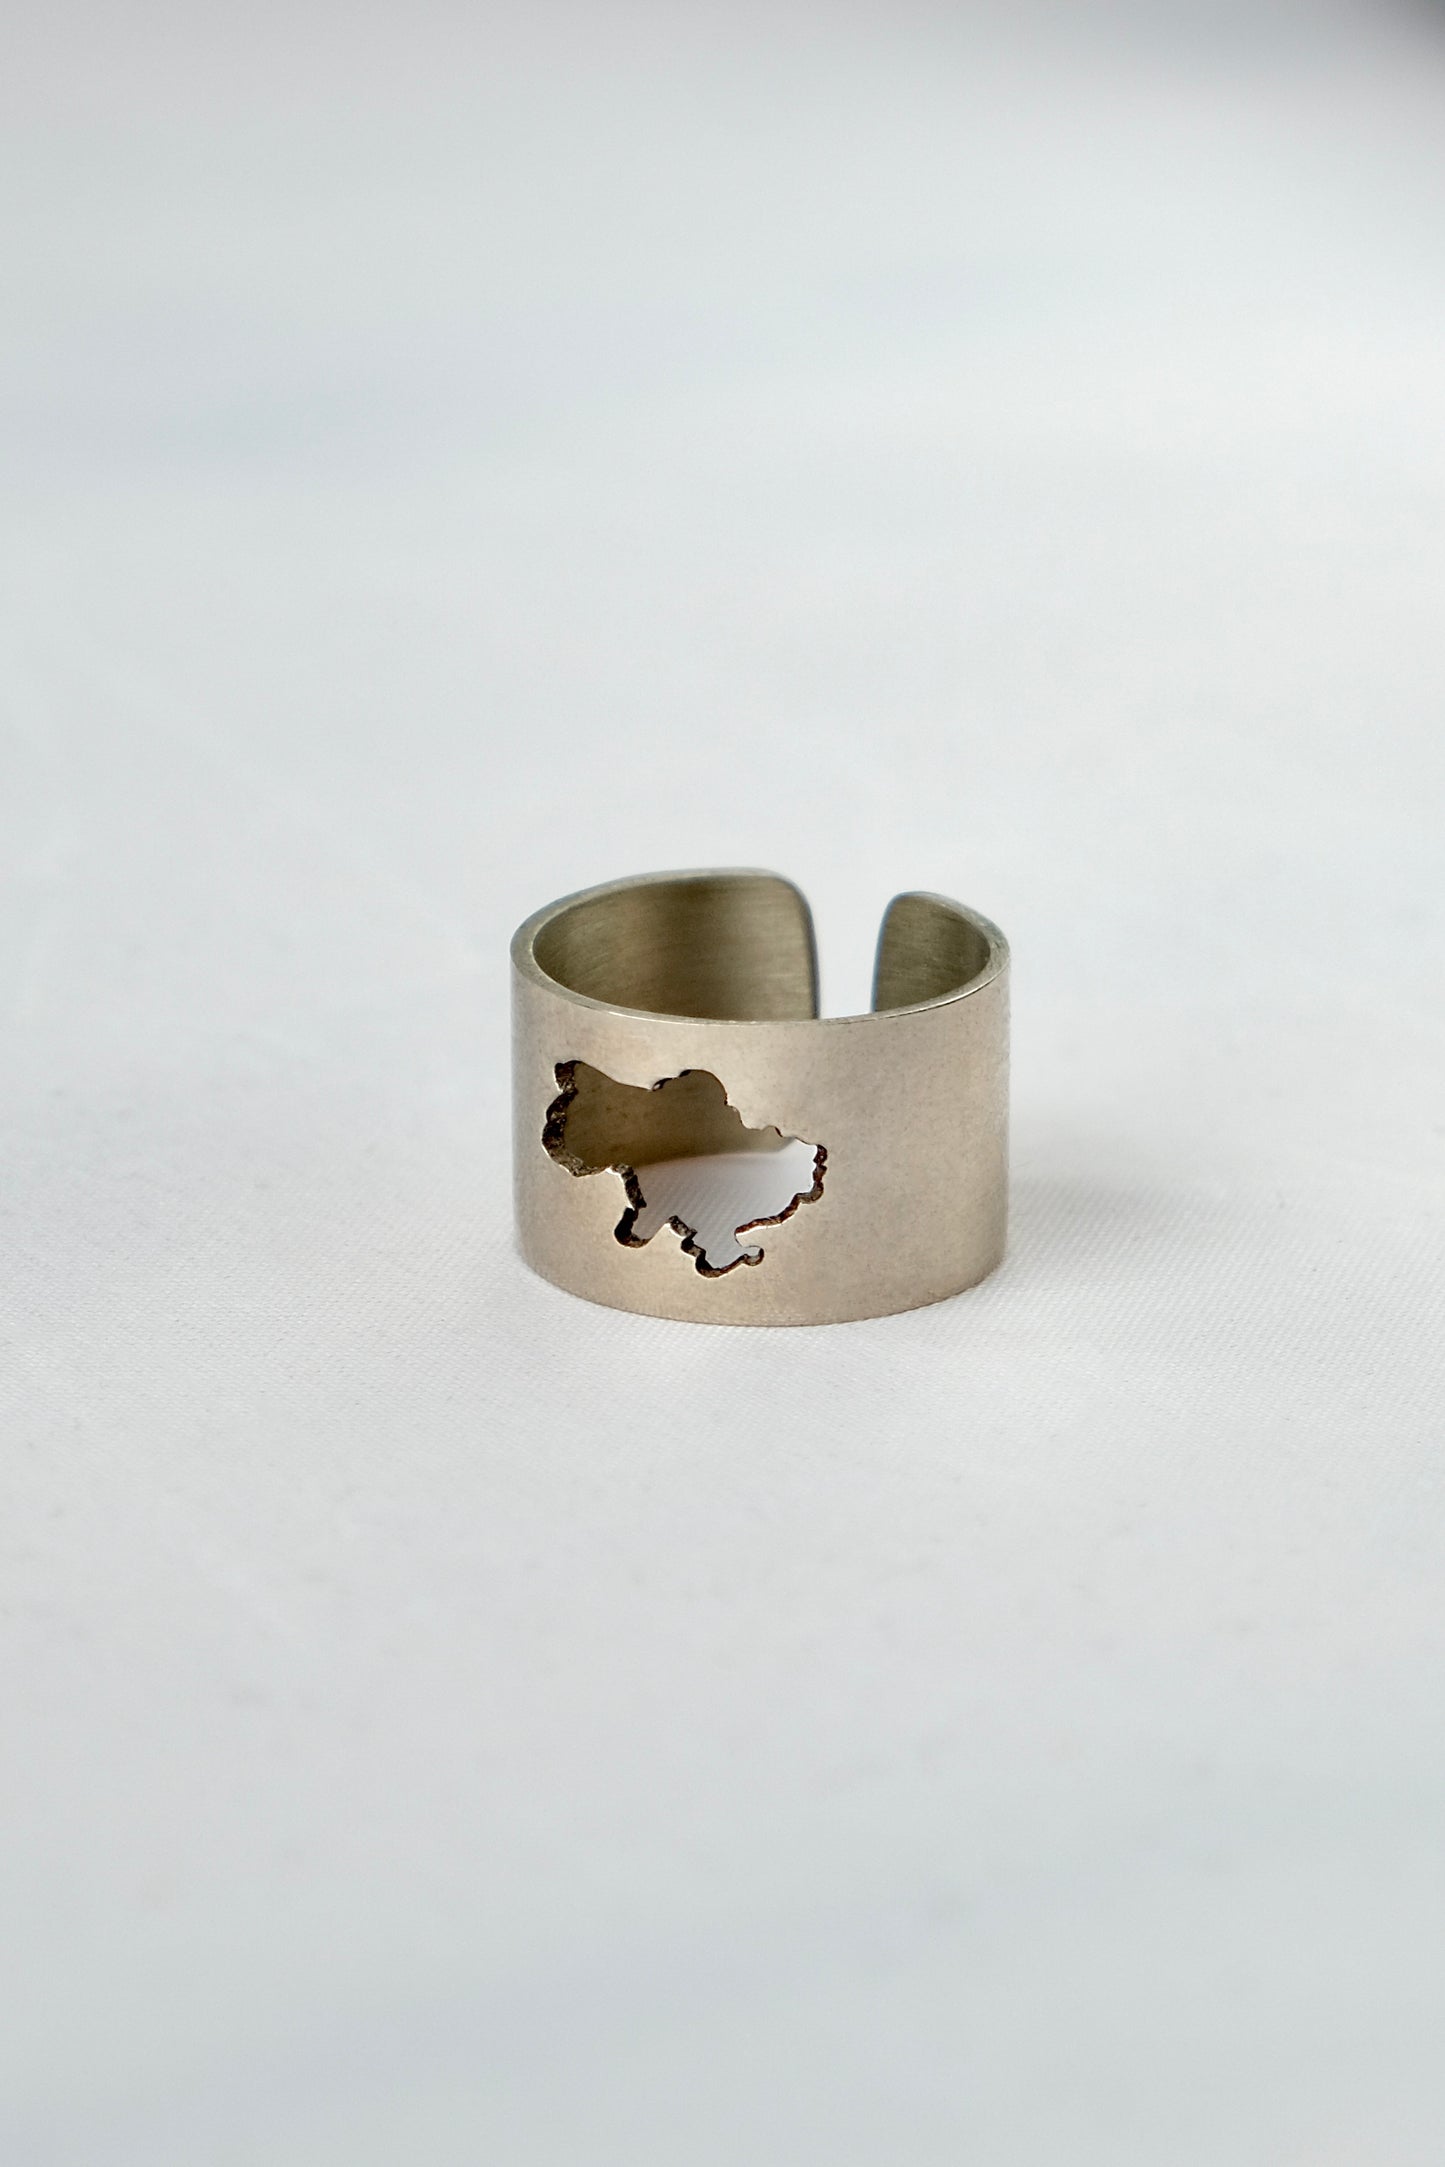 A ring with a cutout